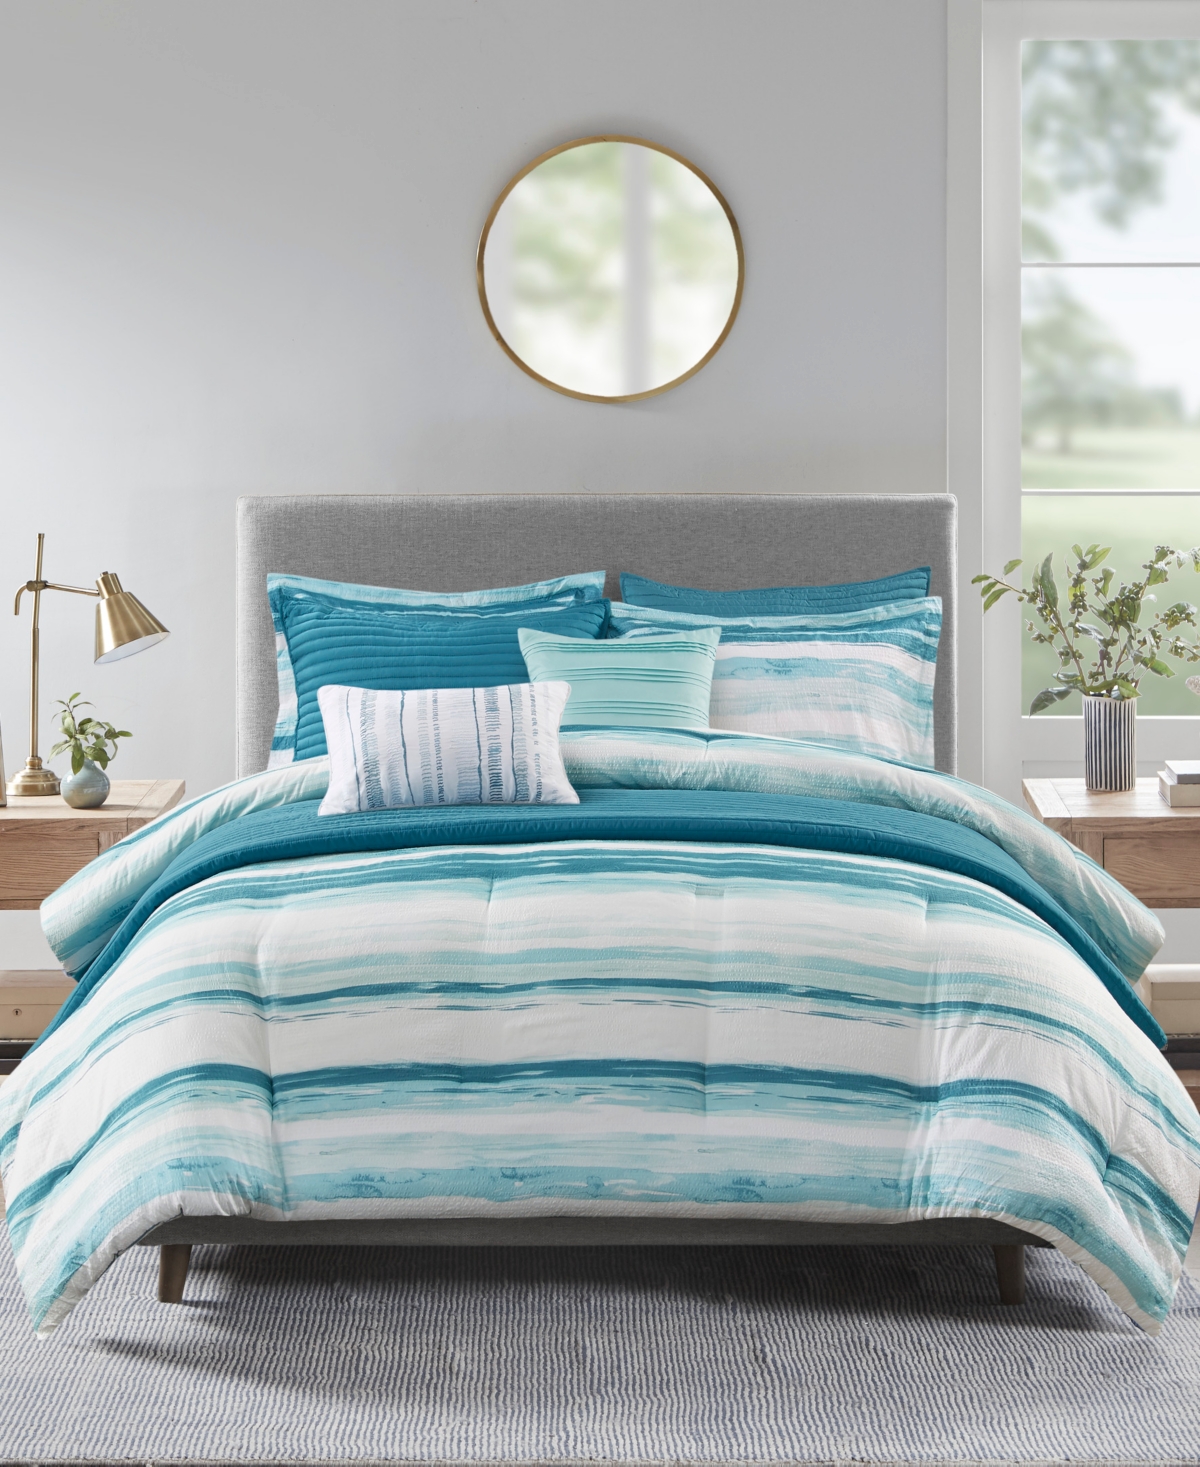 Madison Park Marina 8 Piece Printed Seersucker Comforter And Coverlet Set Collection, King/california King In Aqua